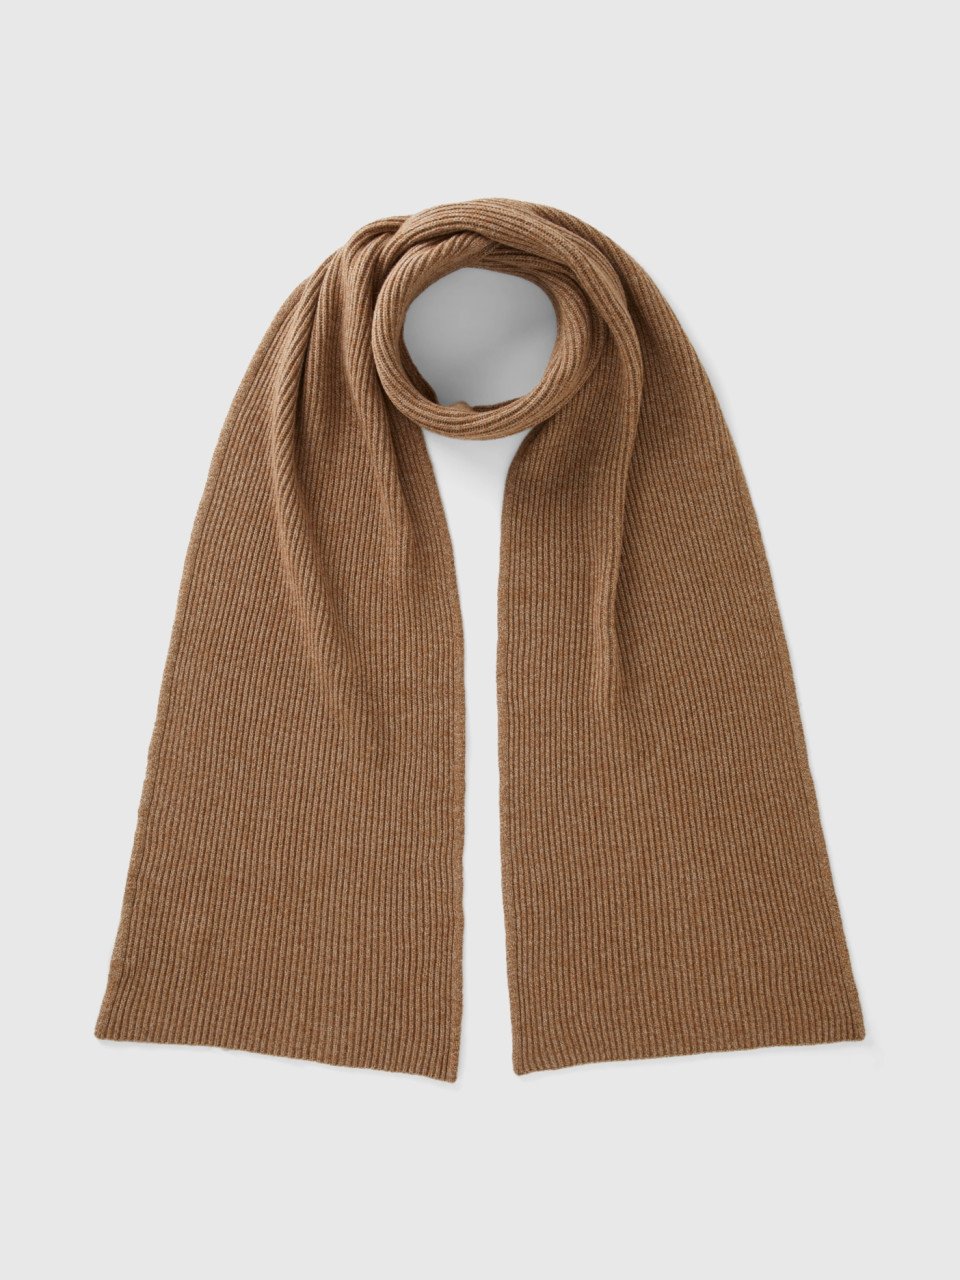 Benetton, Scarf In Wool And Cashmere Blend, Beige, Men